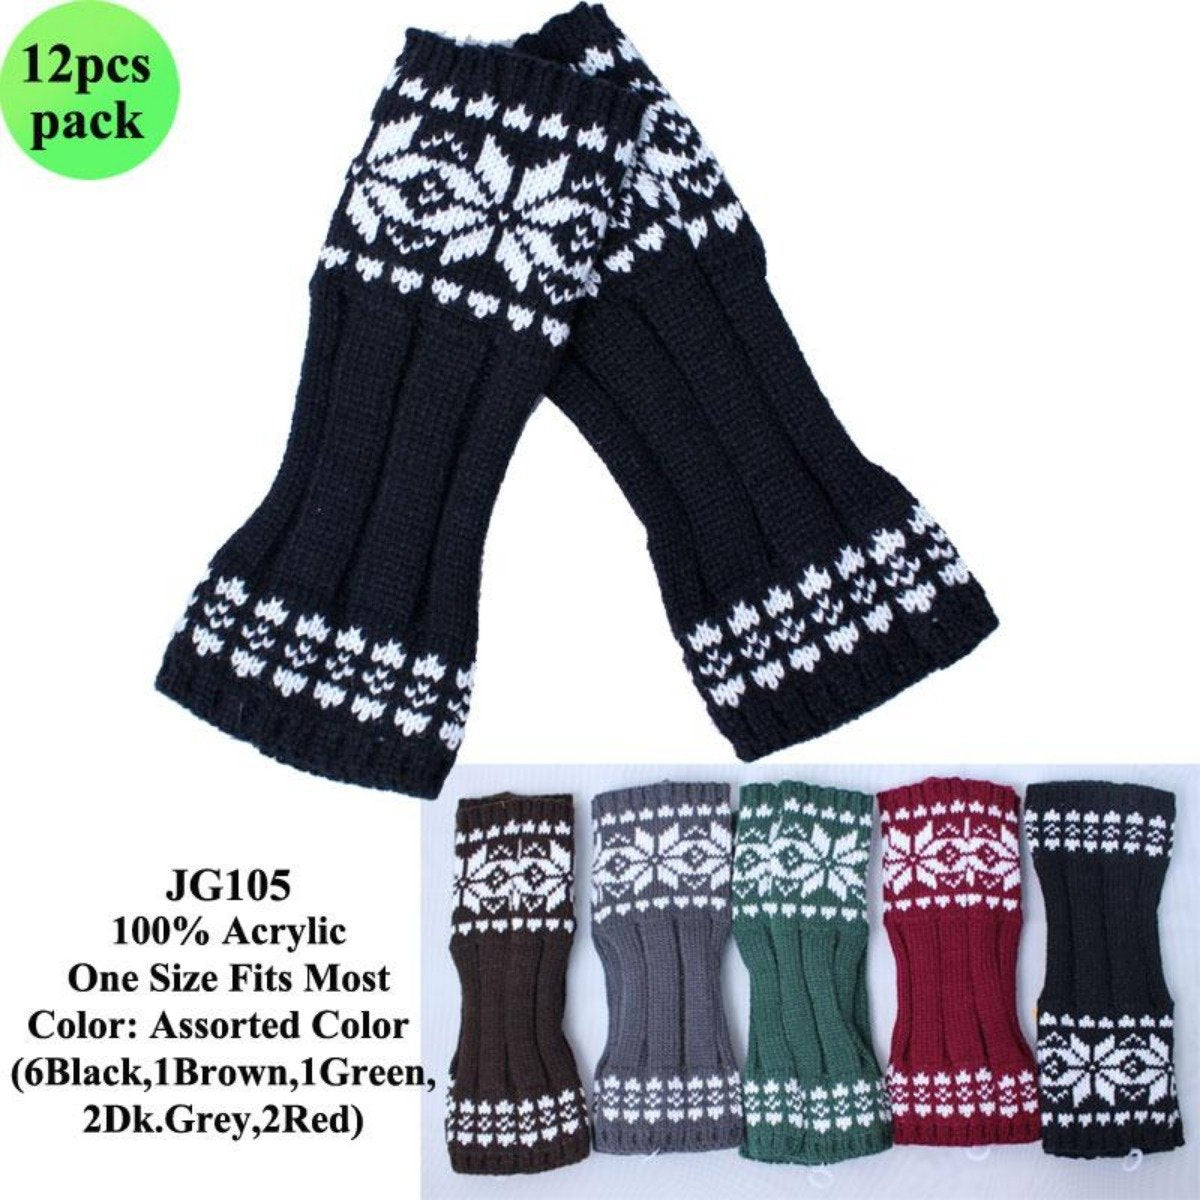 Snowflake Print Knitted Arm-Warmers - 12Pc Set